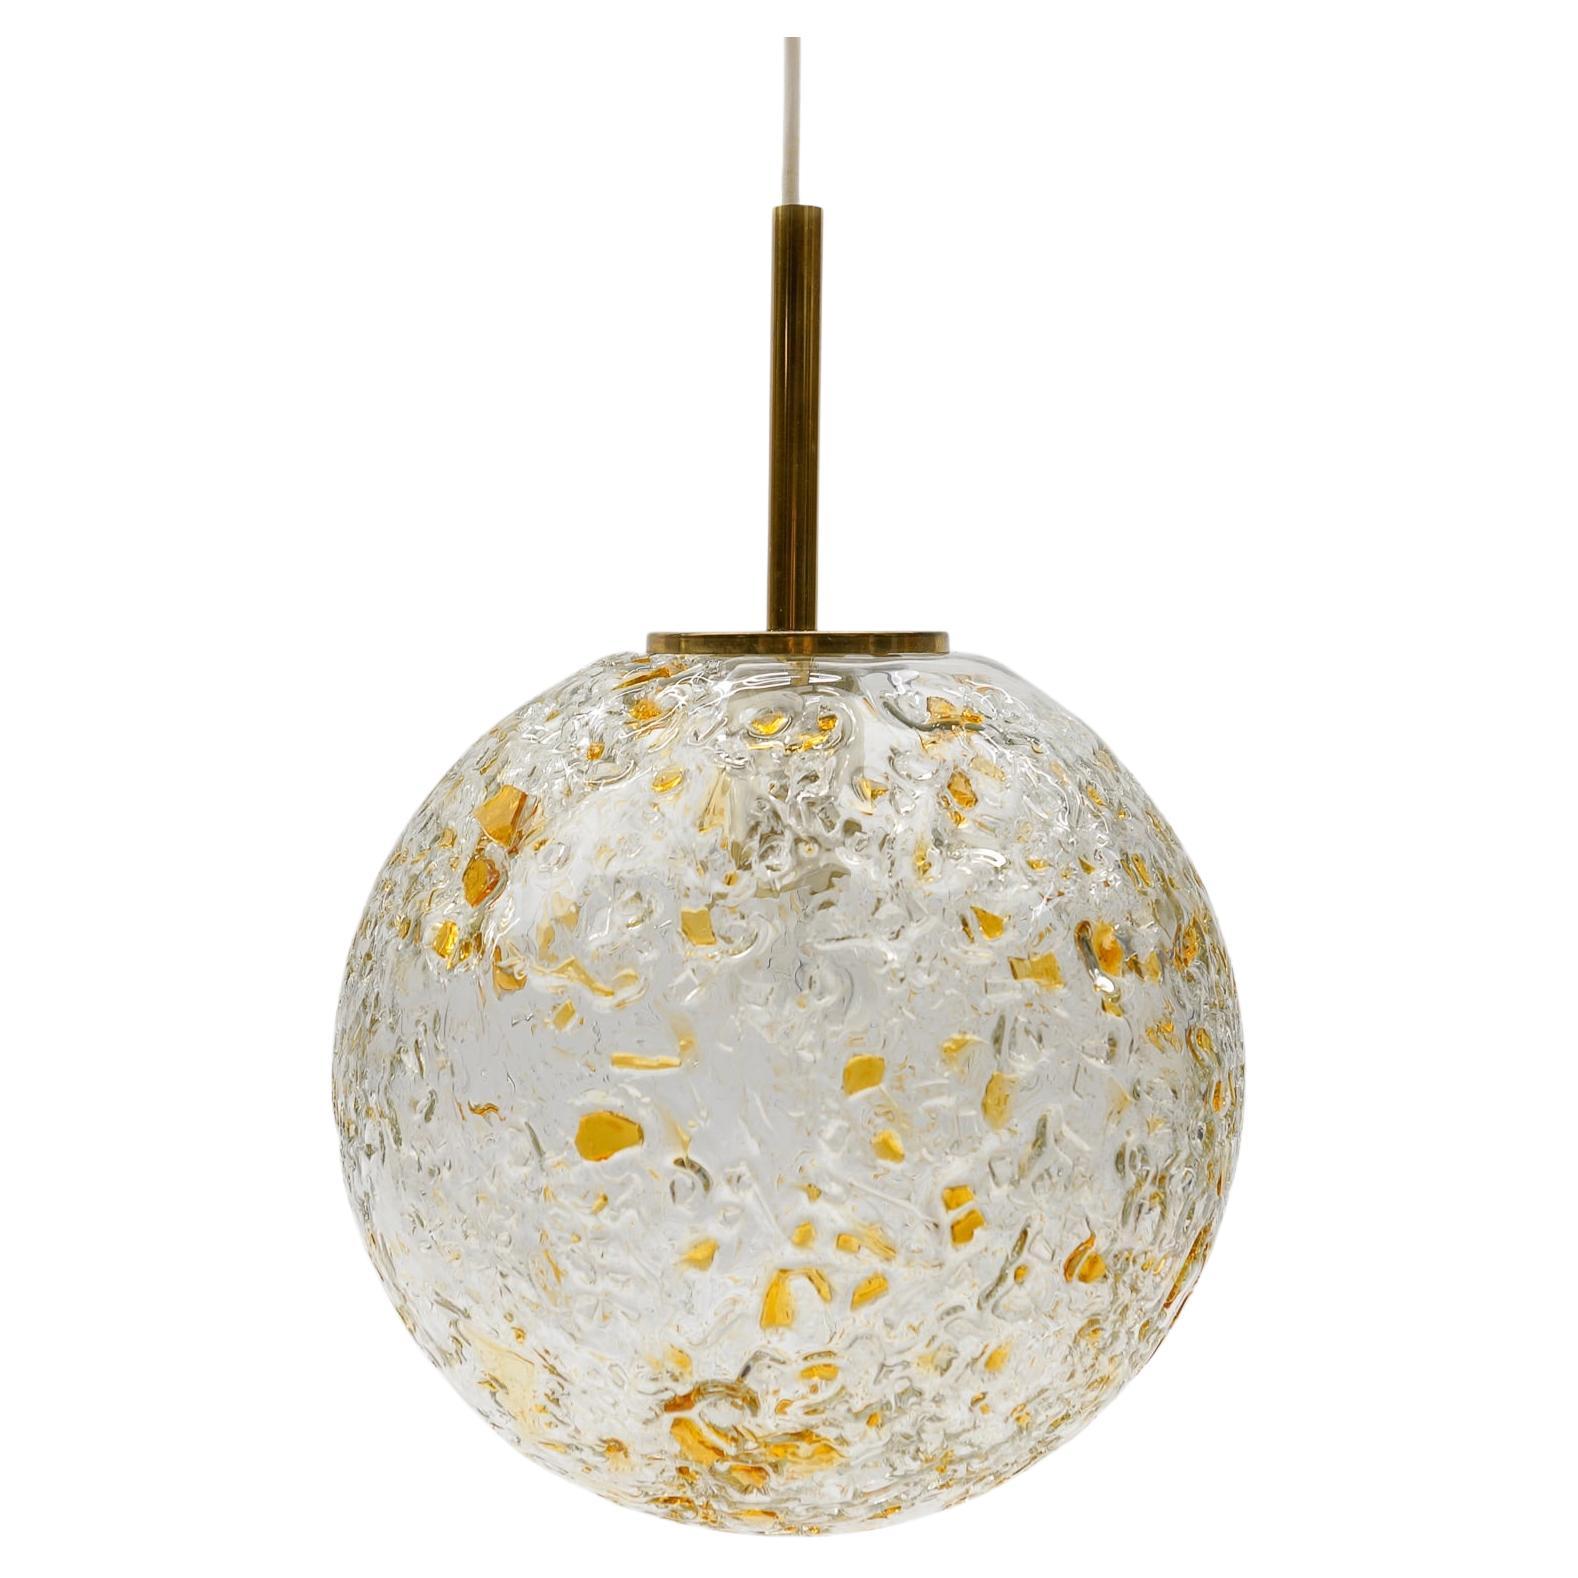 Lovely Mid-Century Modern Glass Ball Pendant Lamp by Doria, 1960s Germany For Sale